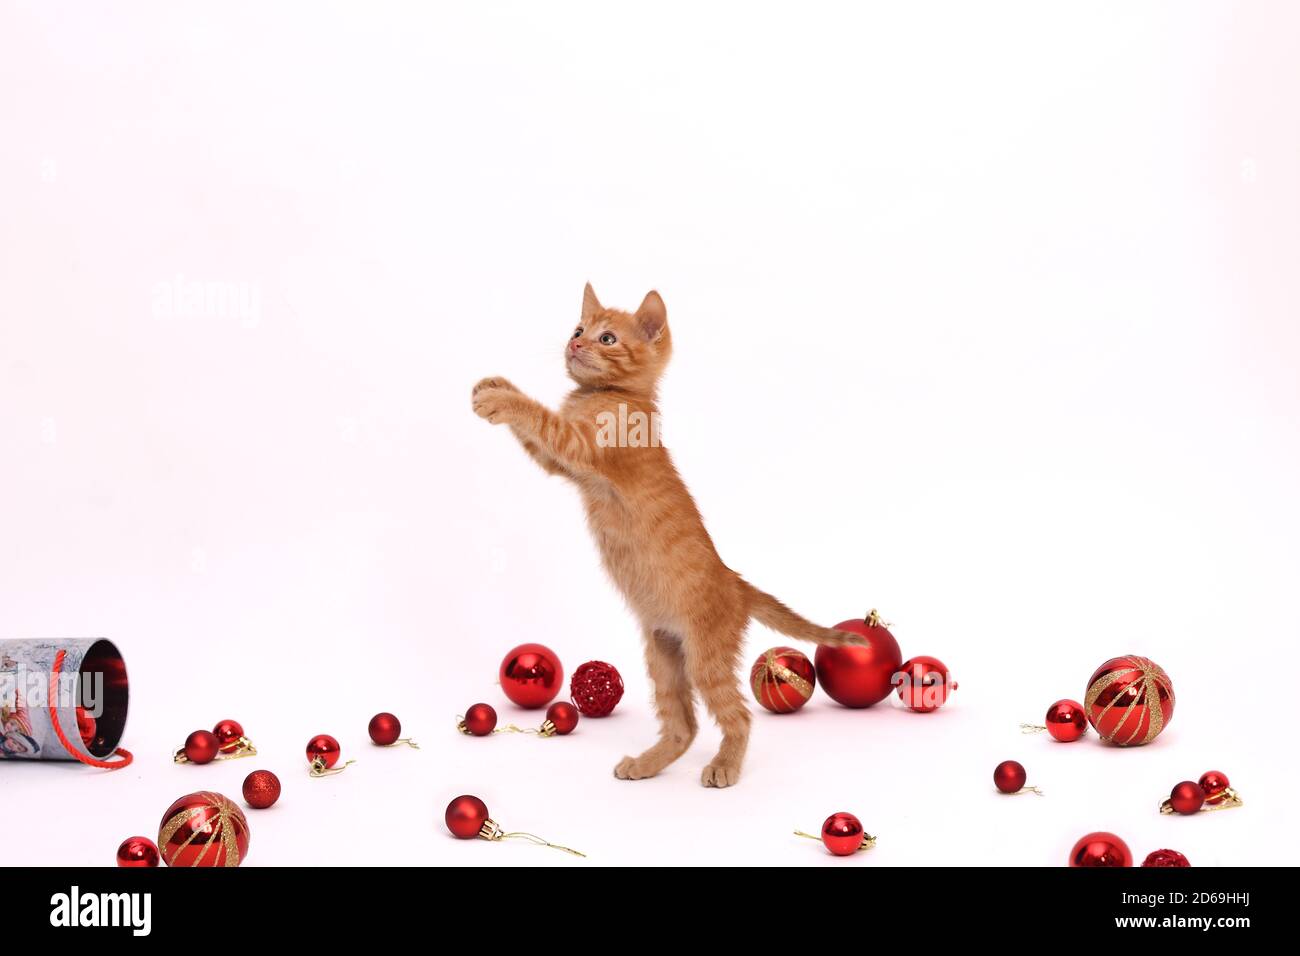 Red playful kitten stands on its hind legs on a white background, red Christmas balls are lying around. Stock Photo